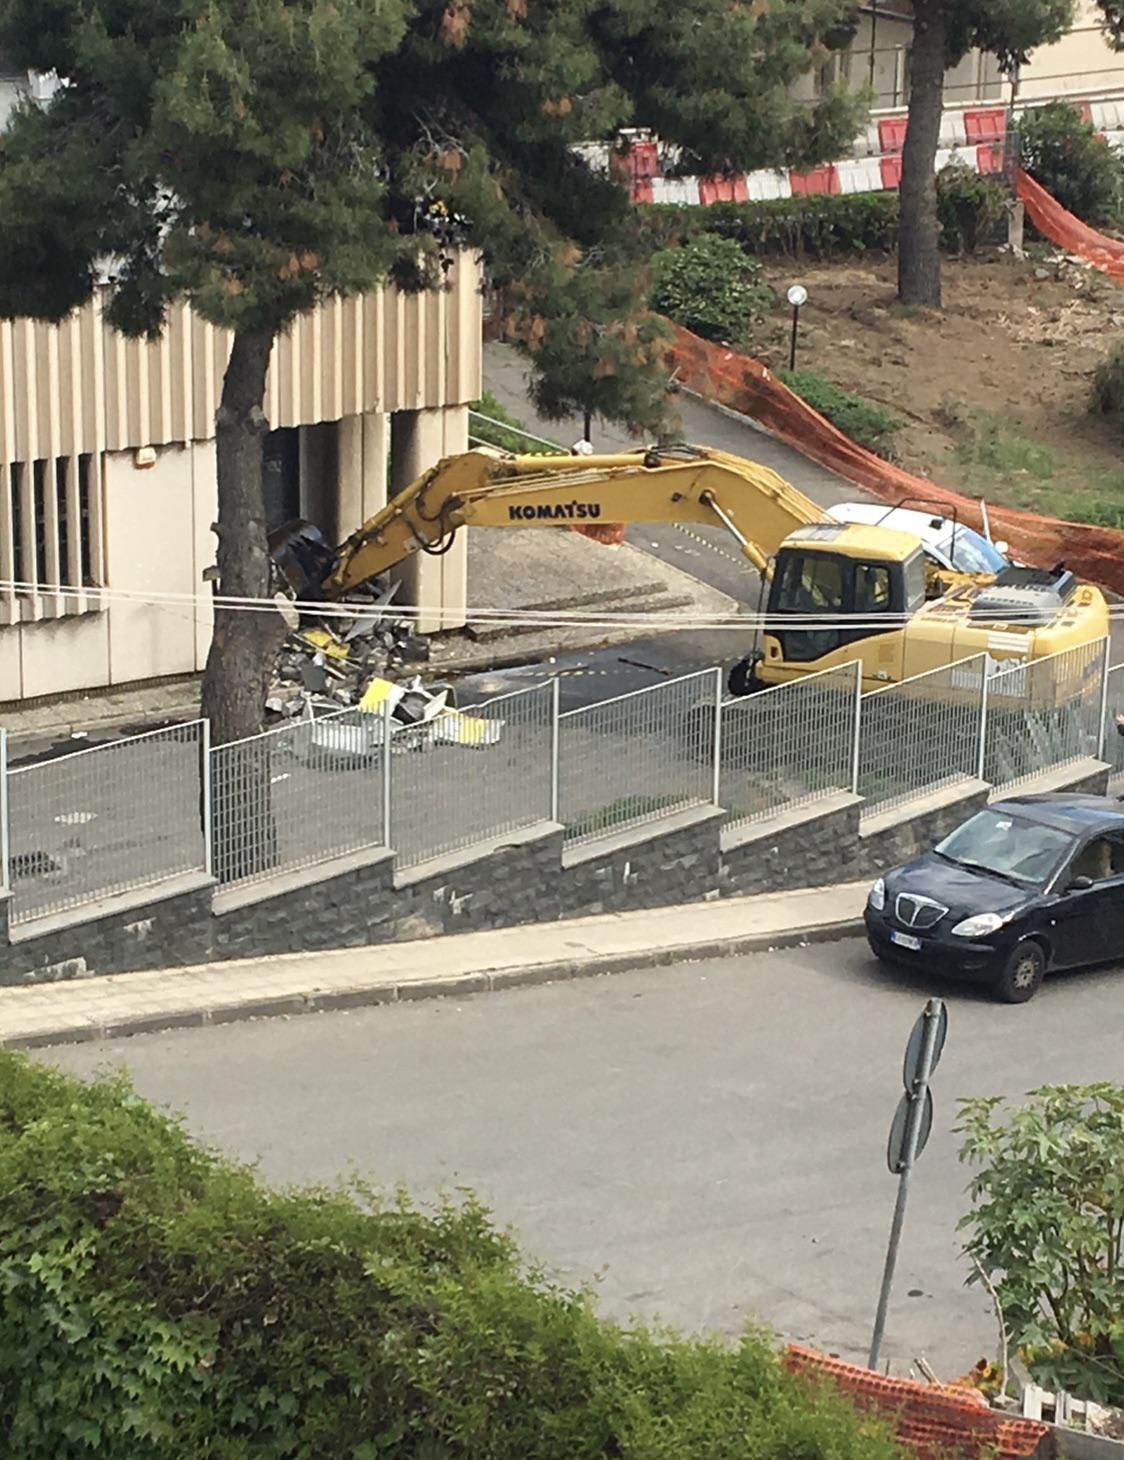 Woke up at 3am to the sound of thiefs ripping an ATM out of the post office across the street using an excavator they highjacked from the construction site next door.